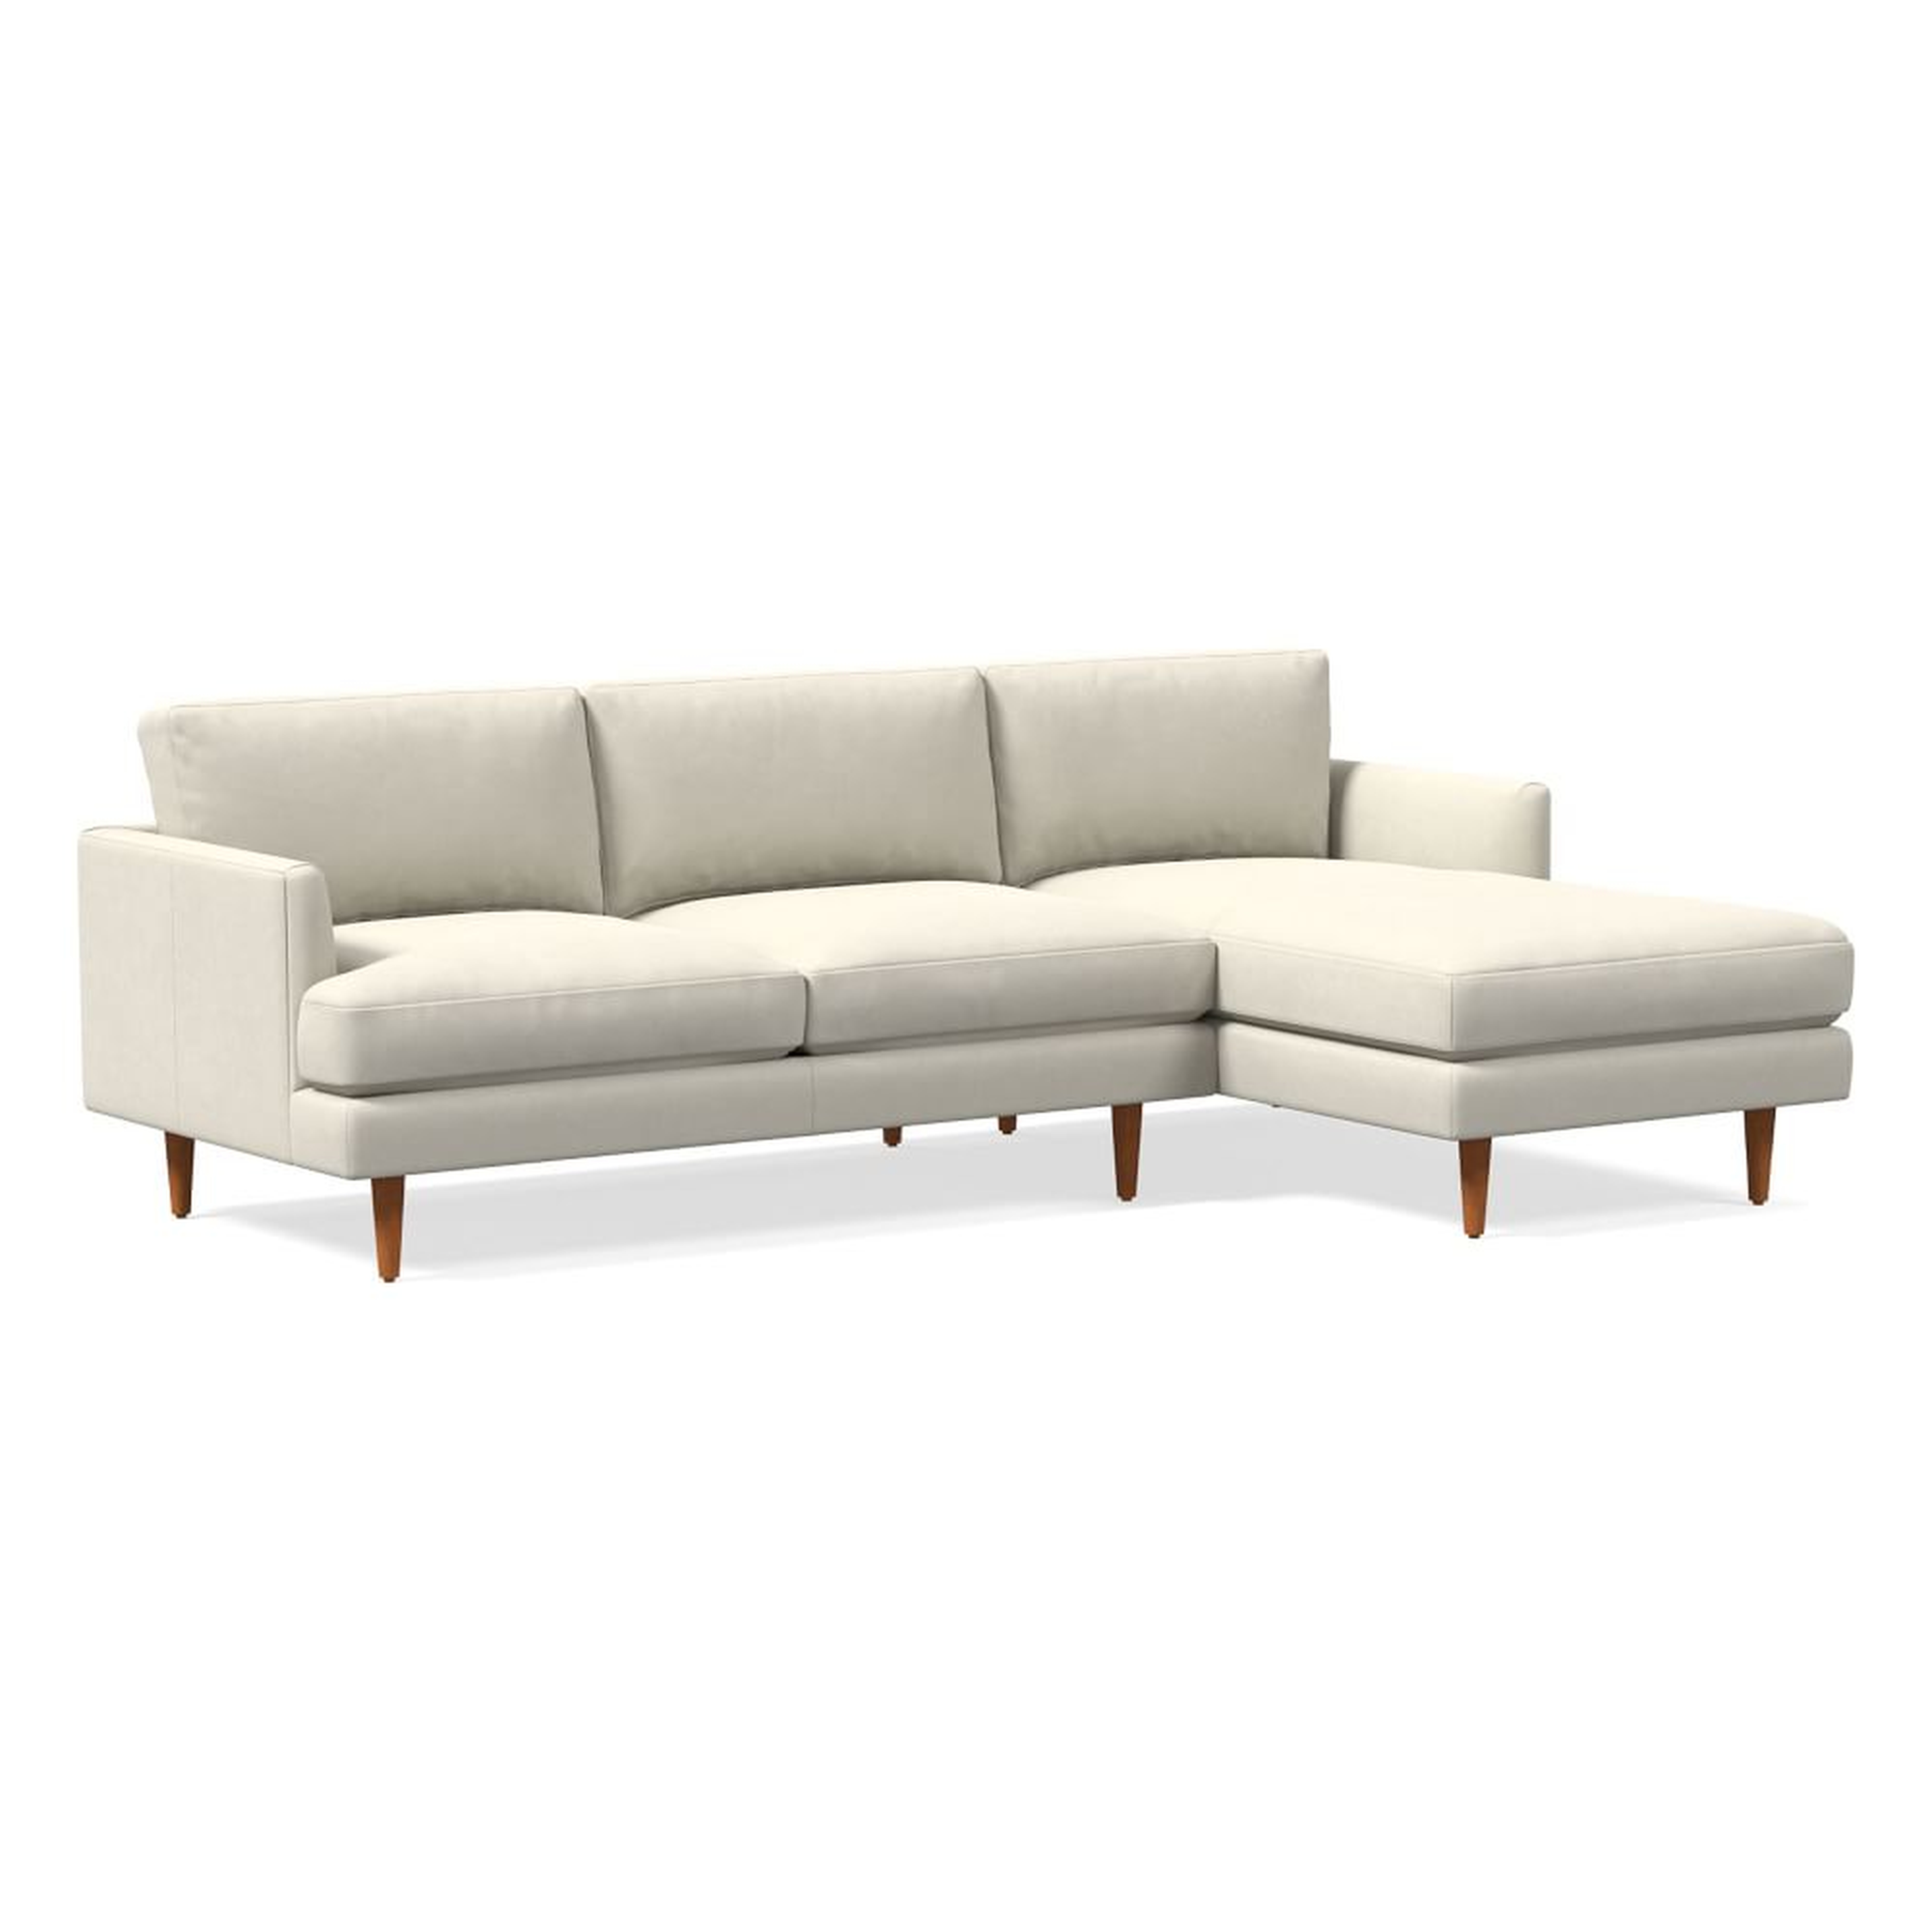 Haven Loft 99" Right 2-Piece Chaise Sectional, Sauvage Leather, Chalk, Pecan - West Elm